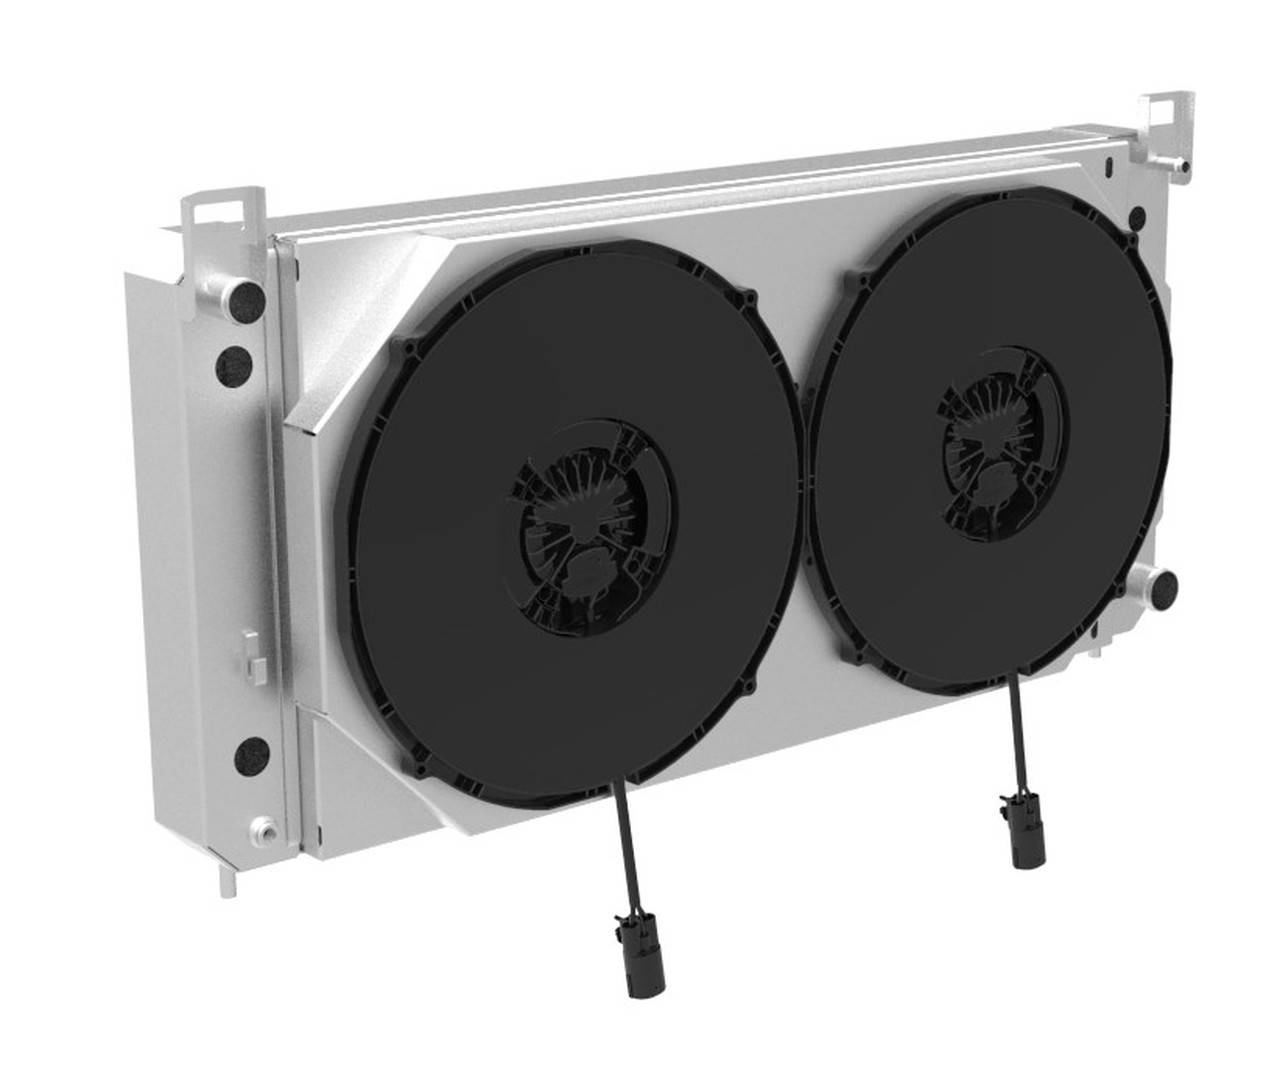 Wizard Cooling Inc - Wizard Cooling - 2001-2014 Various GM Applications Aluminum Radiator (BRUSHLESS FAN OPTIONS) - 9590-112BL